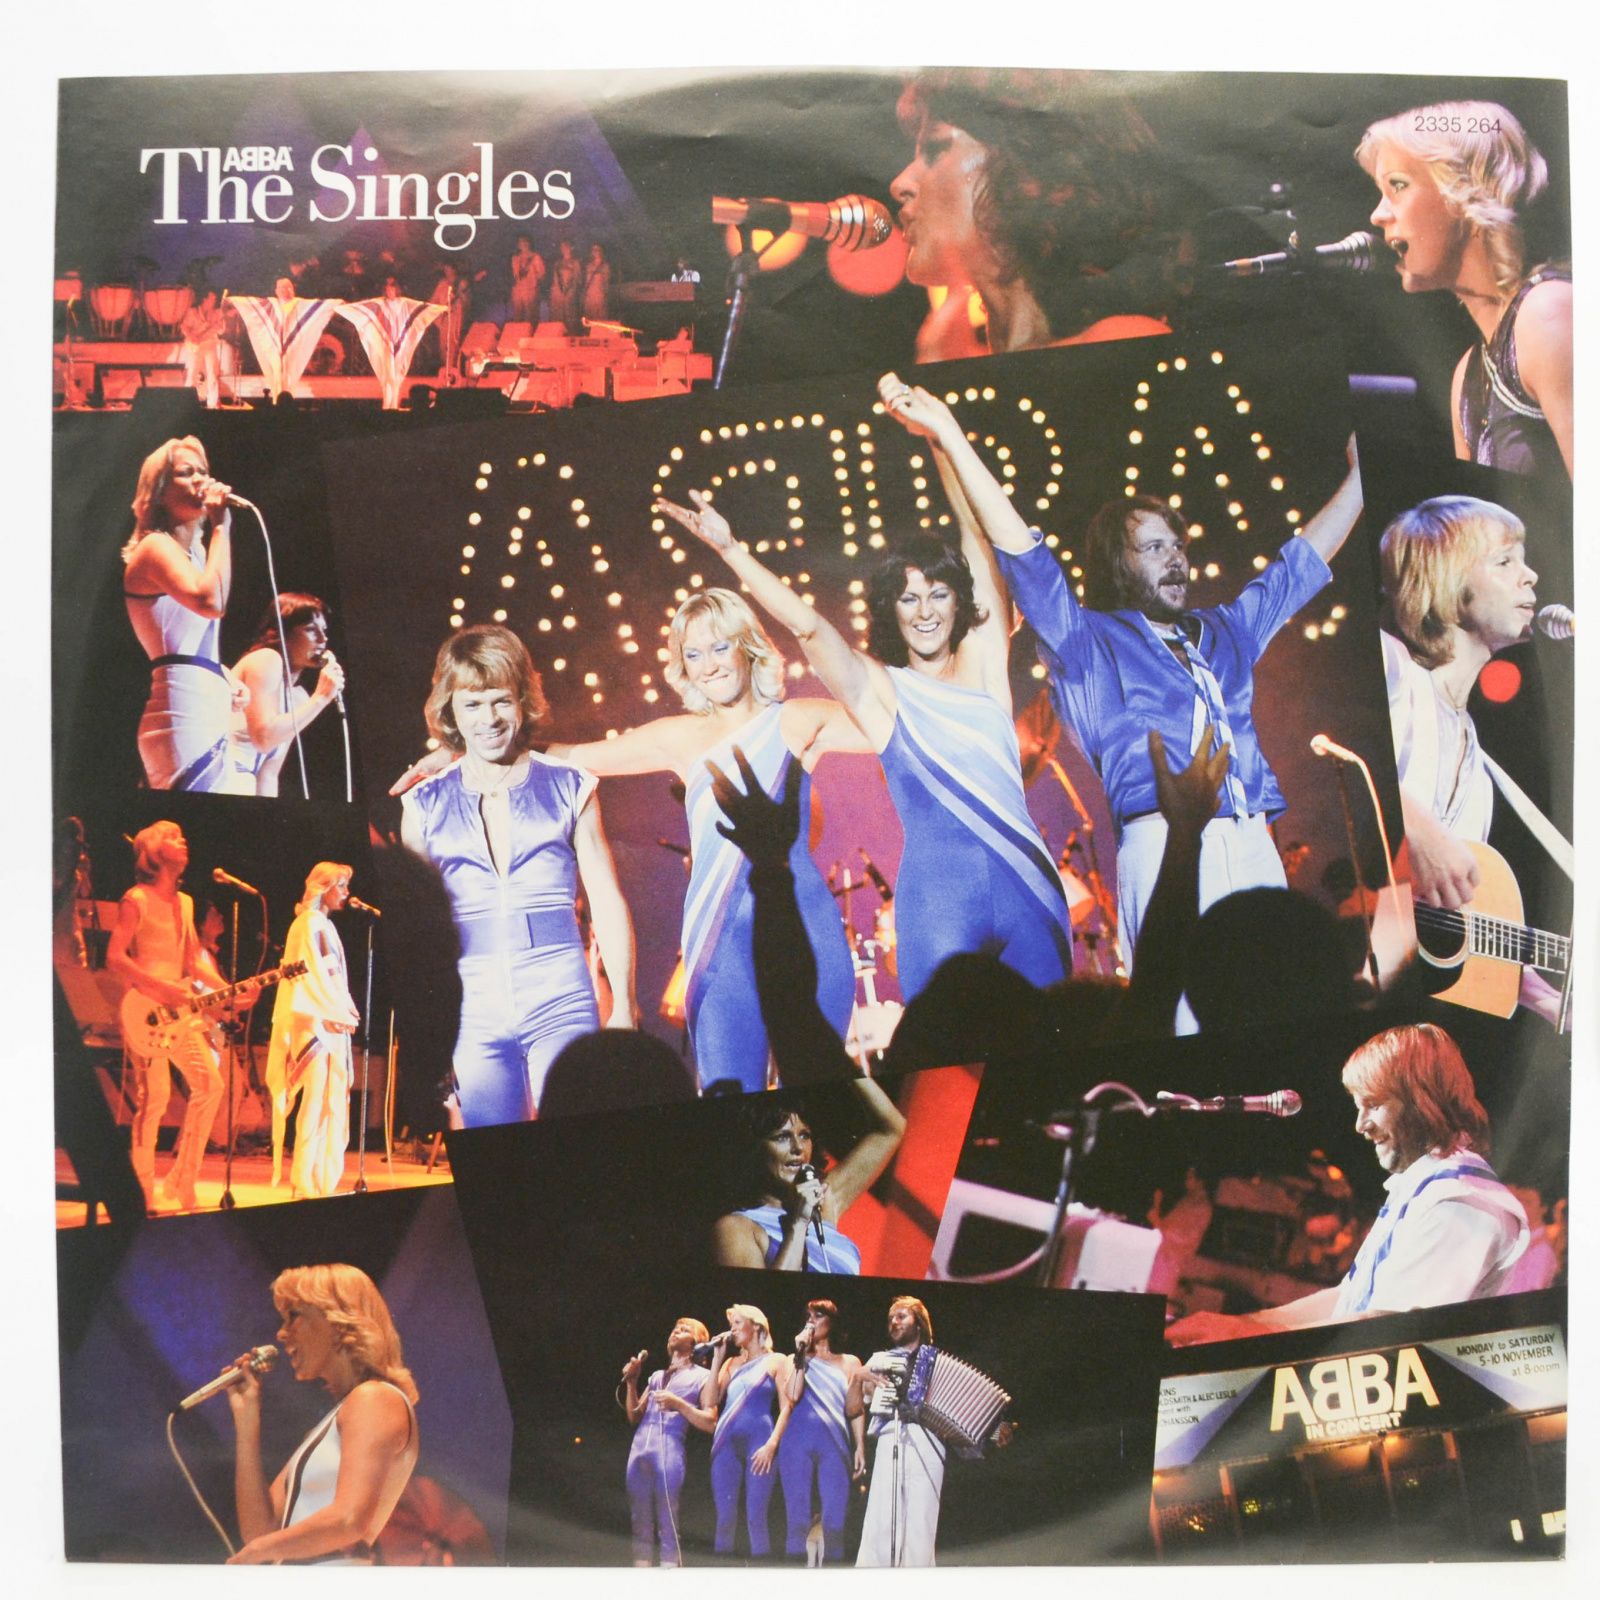 ABBA — The Singles (The First Ten Years) (2LP), 1982